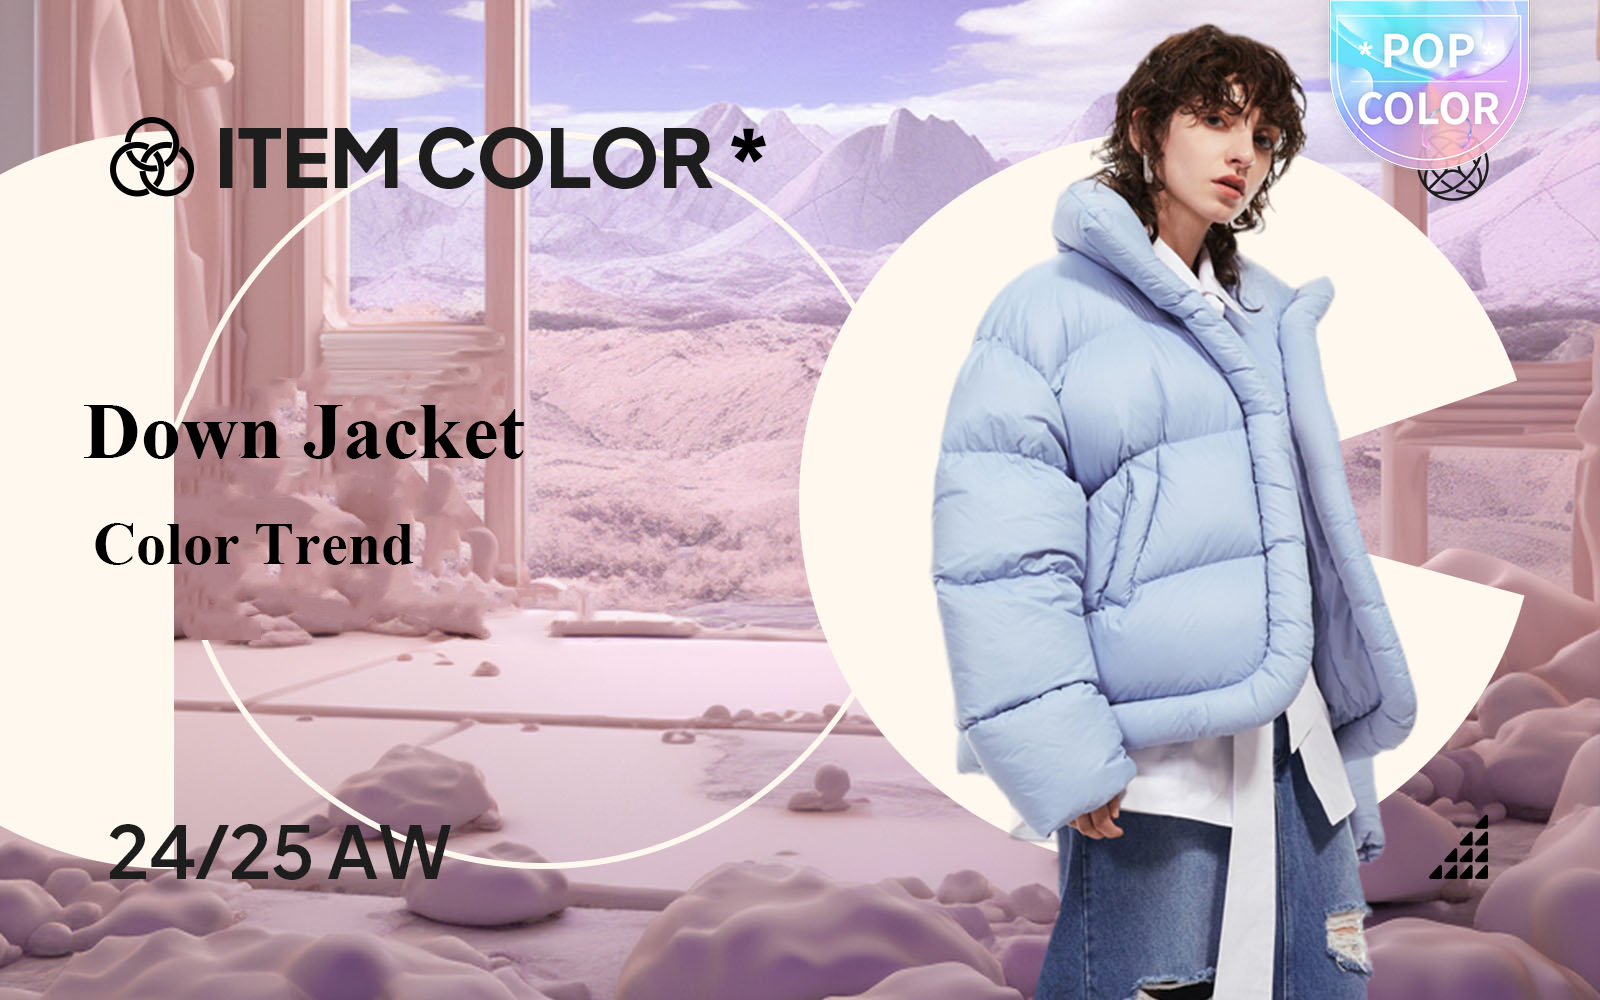 Vibrant Pastel -- The Color Trend for Women's Down Jacket